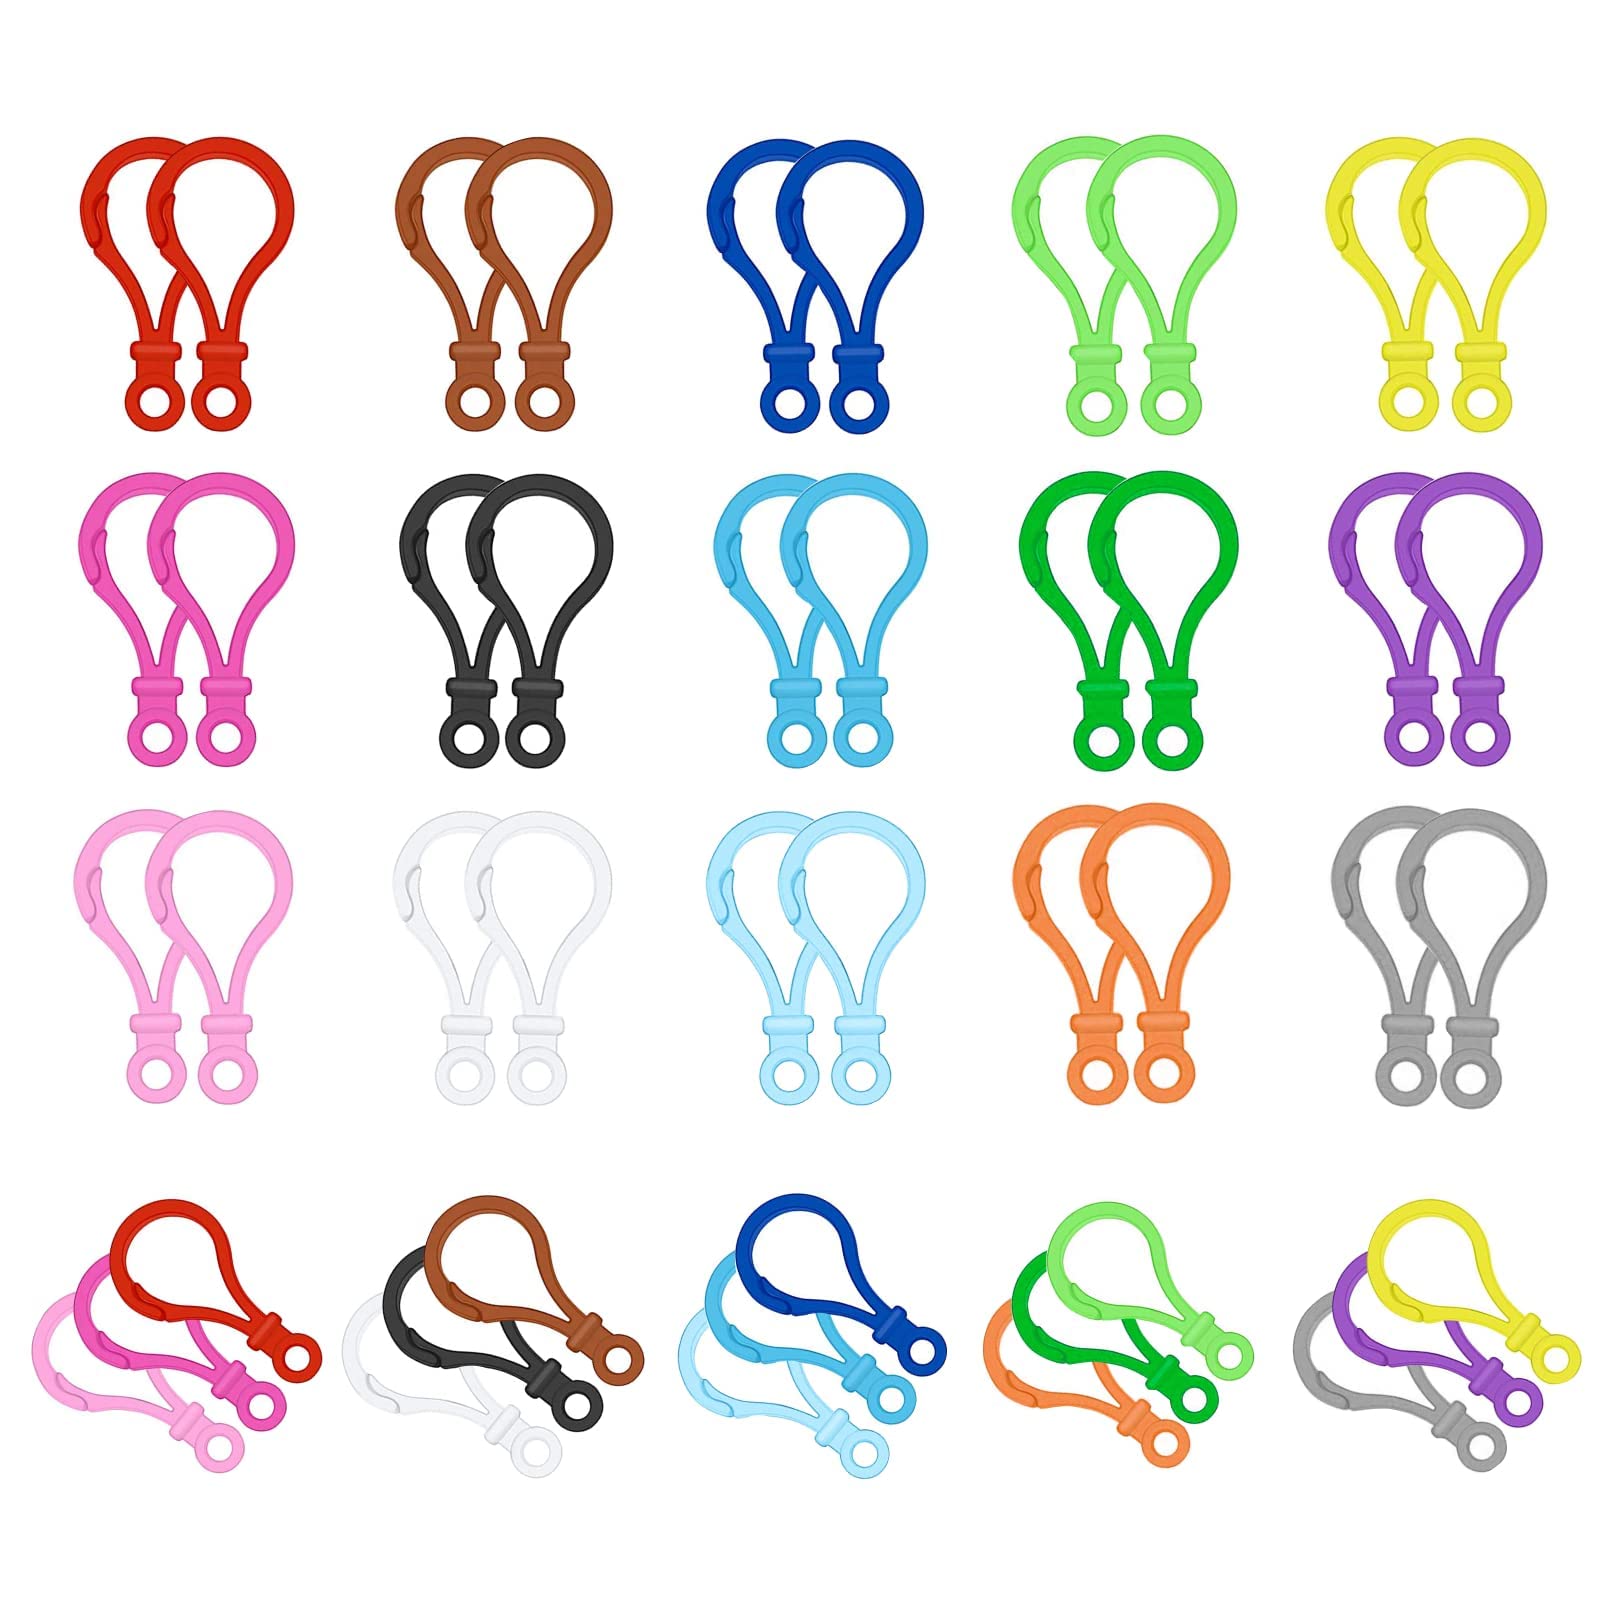 EORTA 100 Pcs Plastic Lobster Claw Clasps Hard Plastic Lobster Clasp Hooks  Lanyard Snap Clips for DIY, Crafts, Handmade, Key Chain, Toy Accessories,35